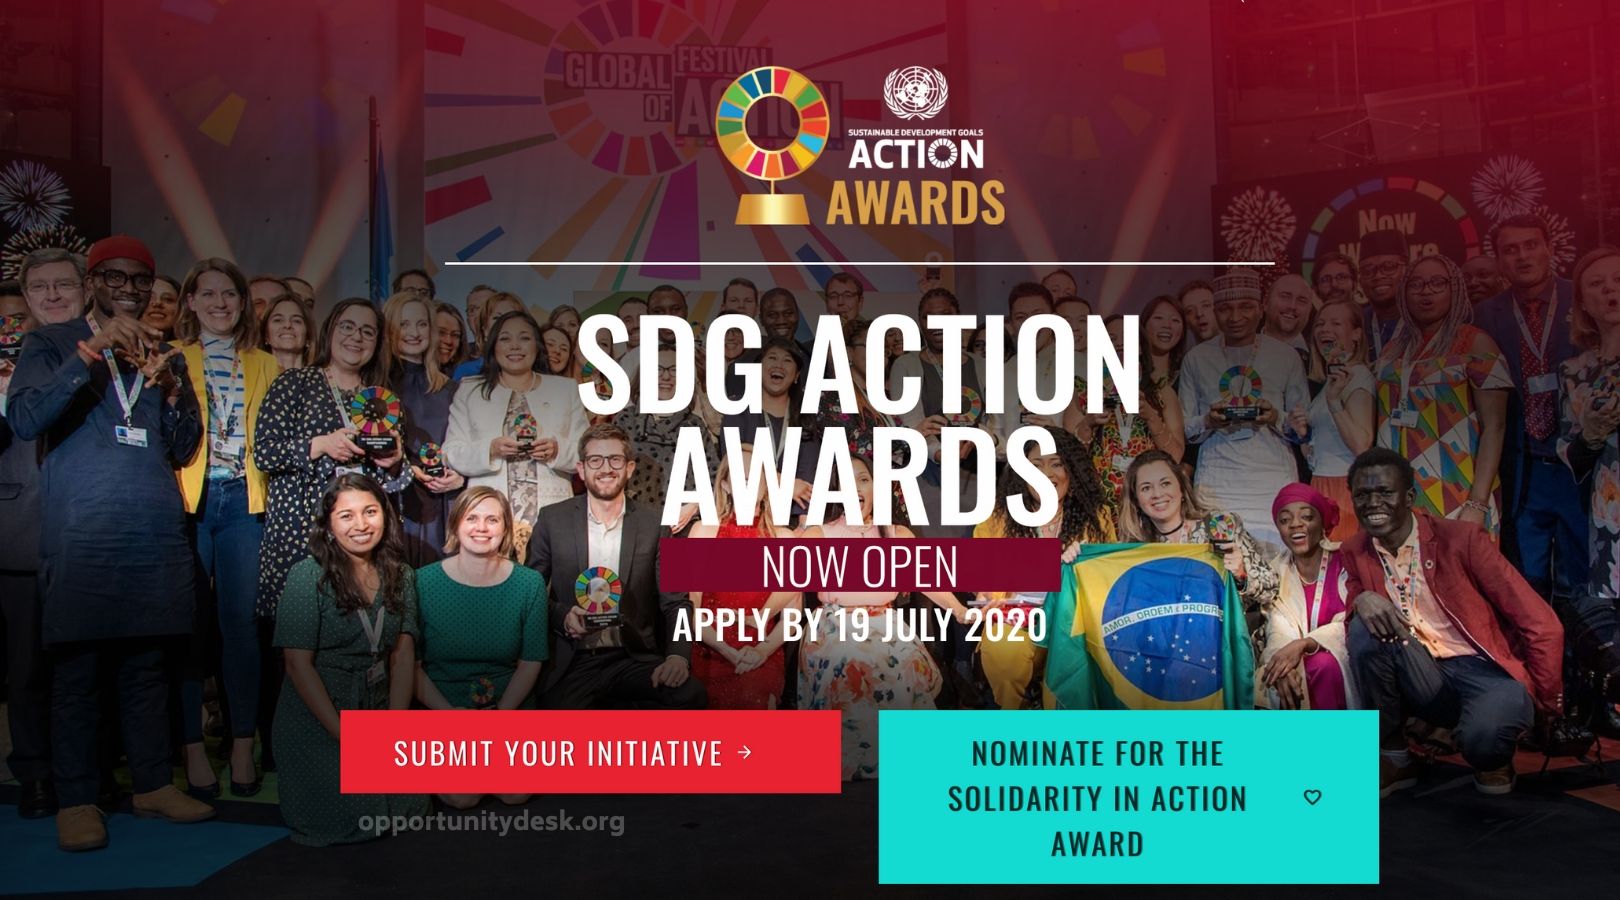 UN Sustainable Development Goals (SDG) Action Awards 2020 for Outstanding Initiatives